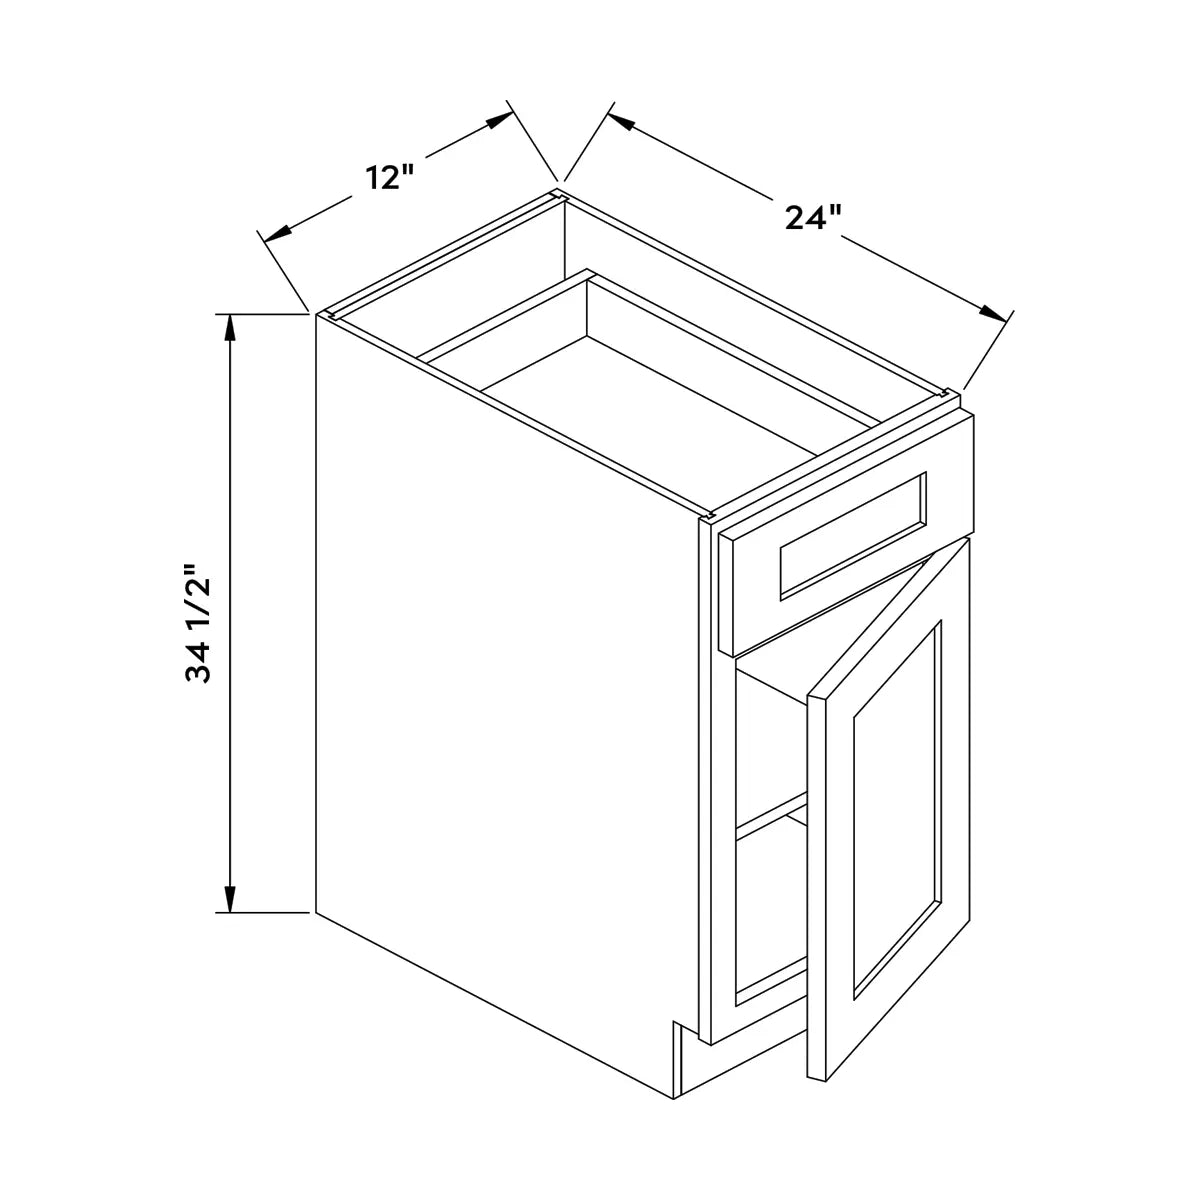 Craft Cabinetry Shaker Aqua 12”W Base Cabinet Image Specifications